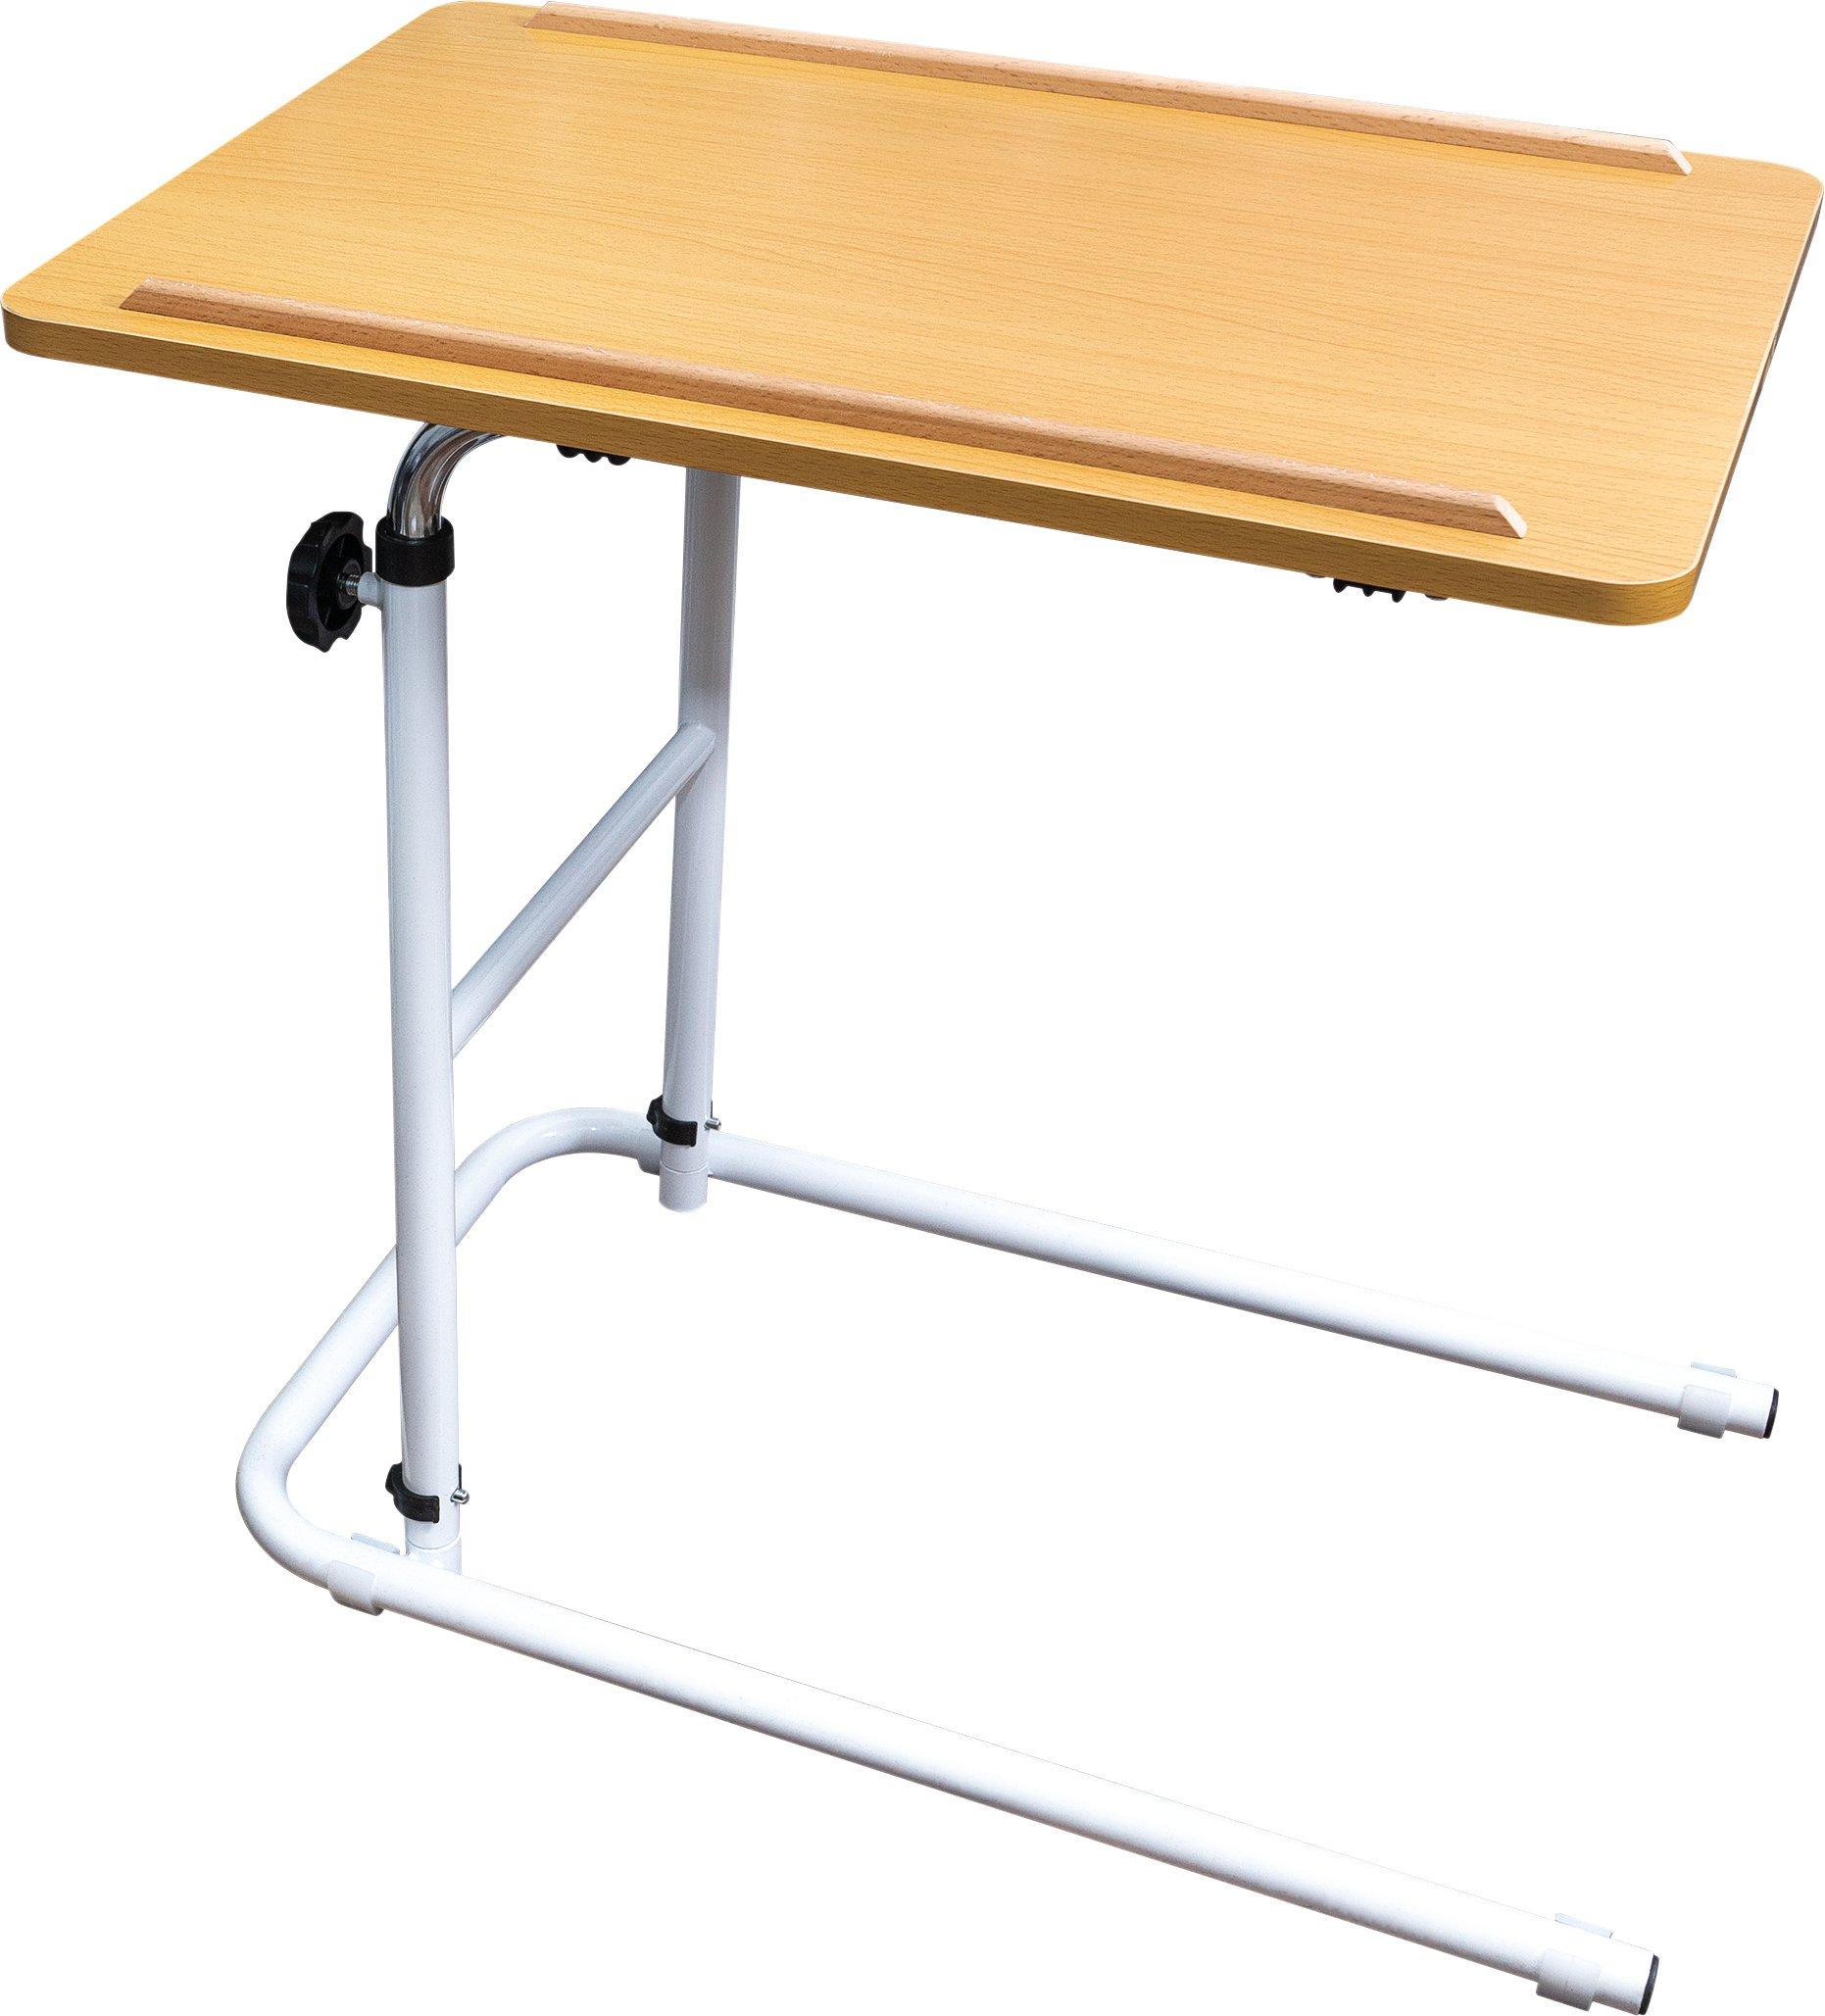 Economy Overbed Table Without Castors